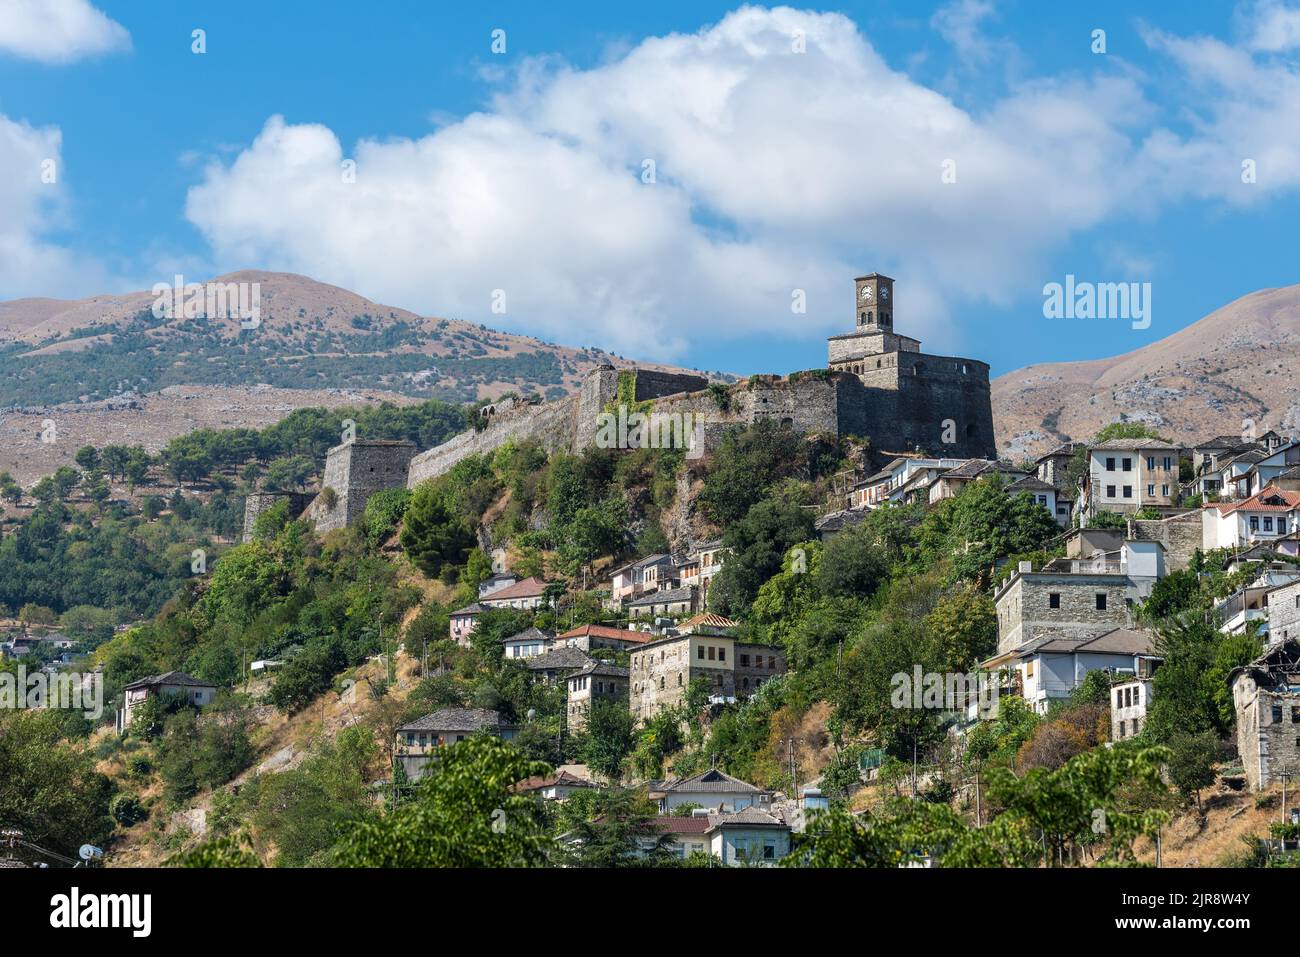 Landscape with a Gjirokaster Castle and clock tower with Ottoman houses below in Gjirokaster, Albania Stock Photo